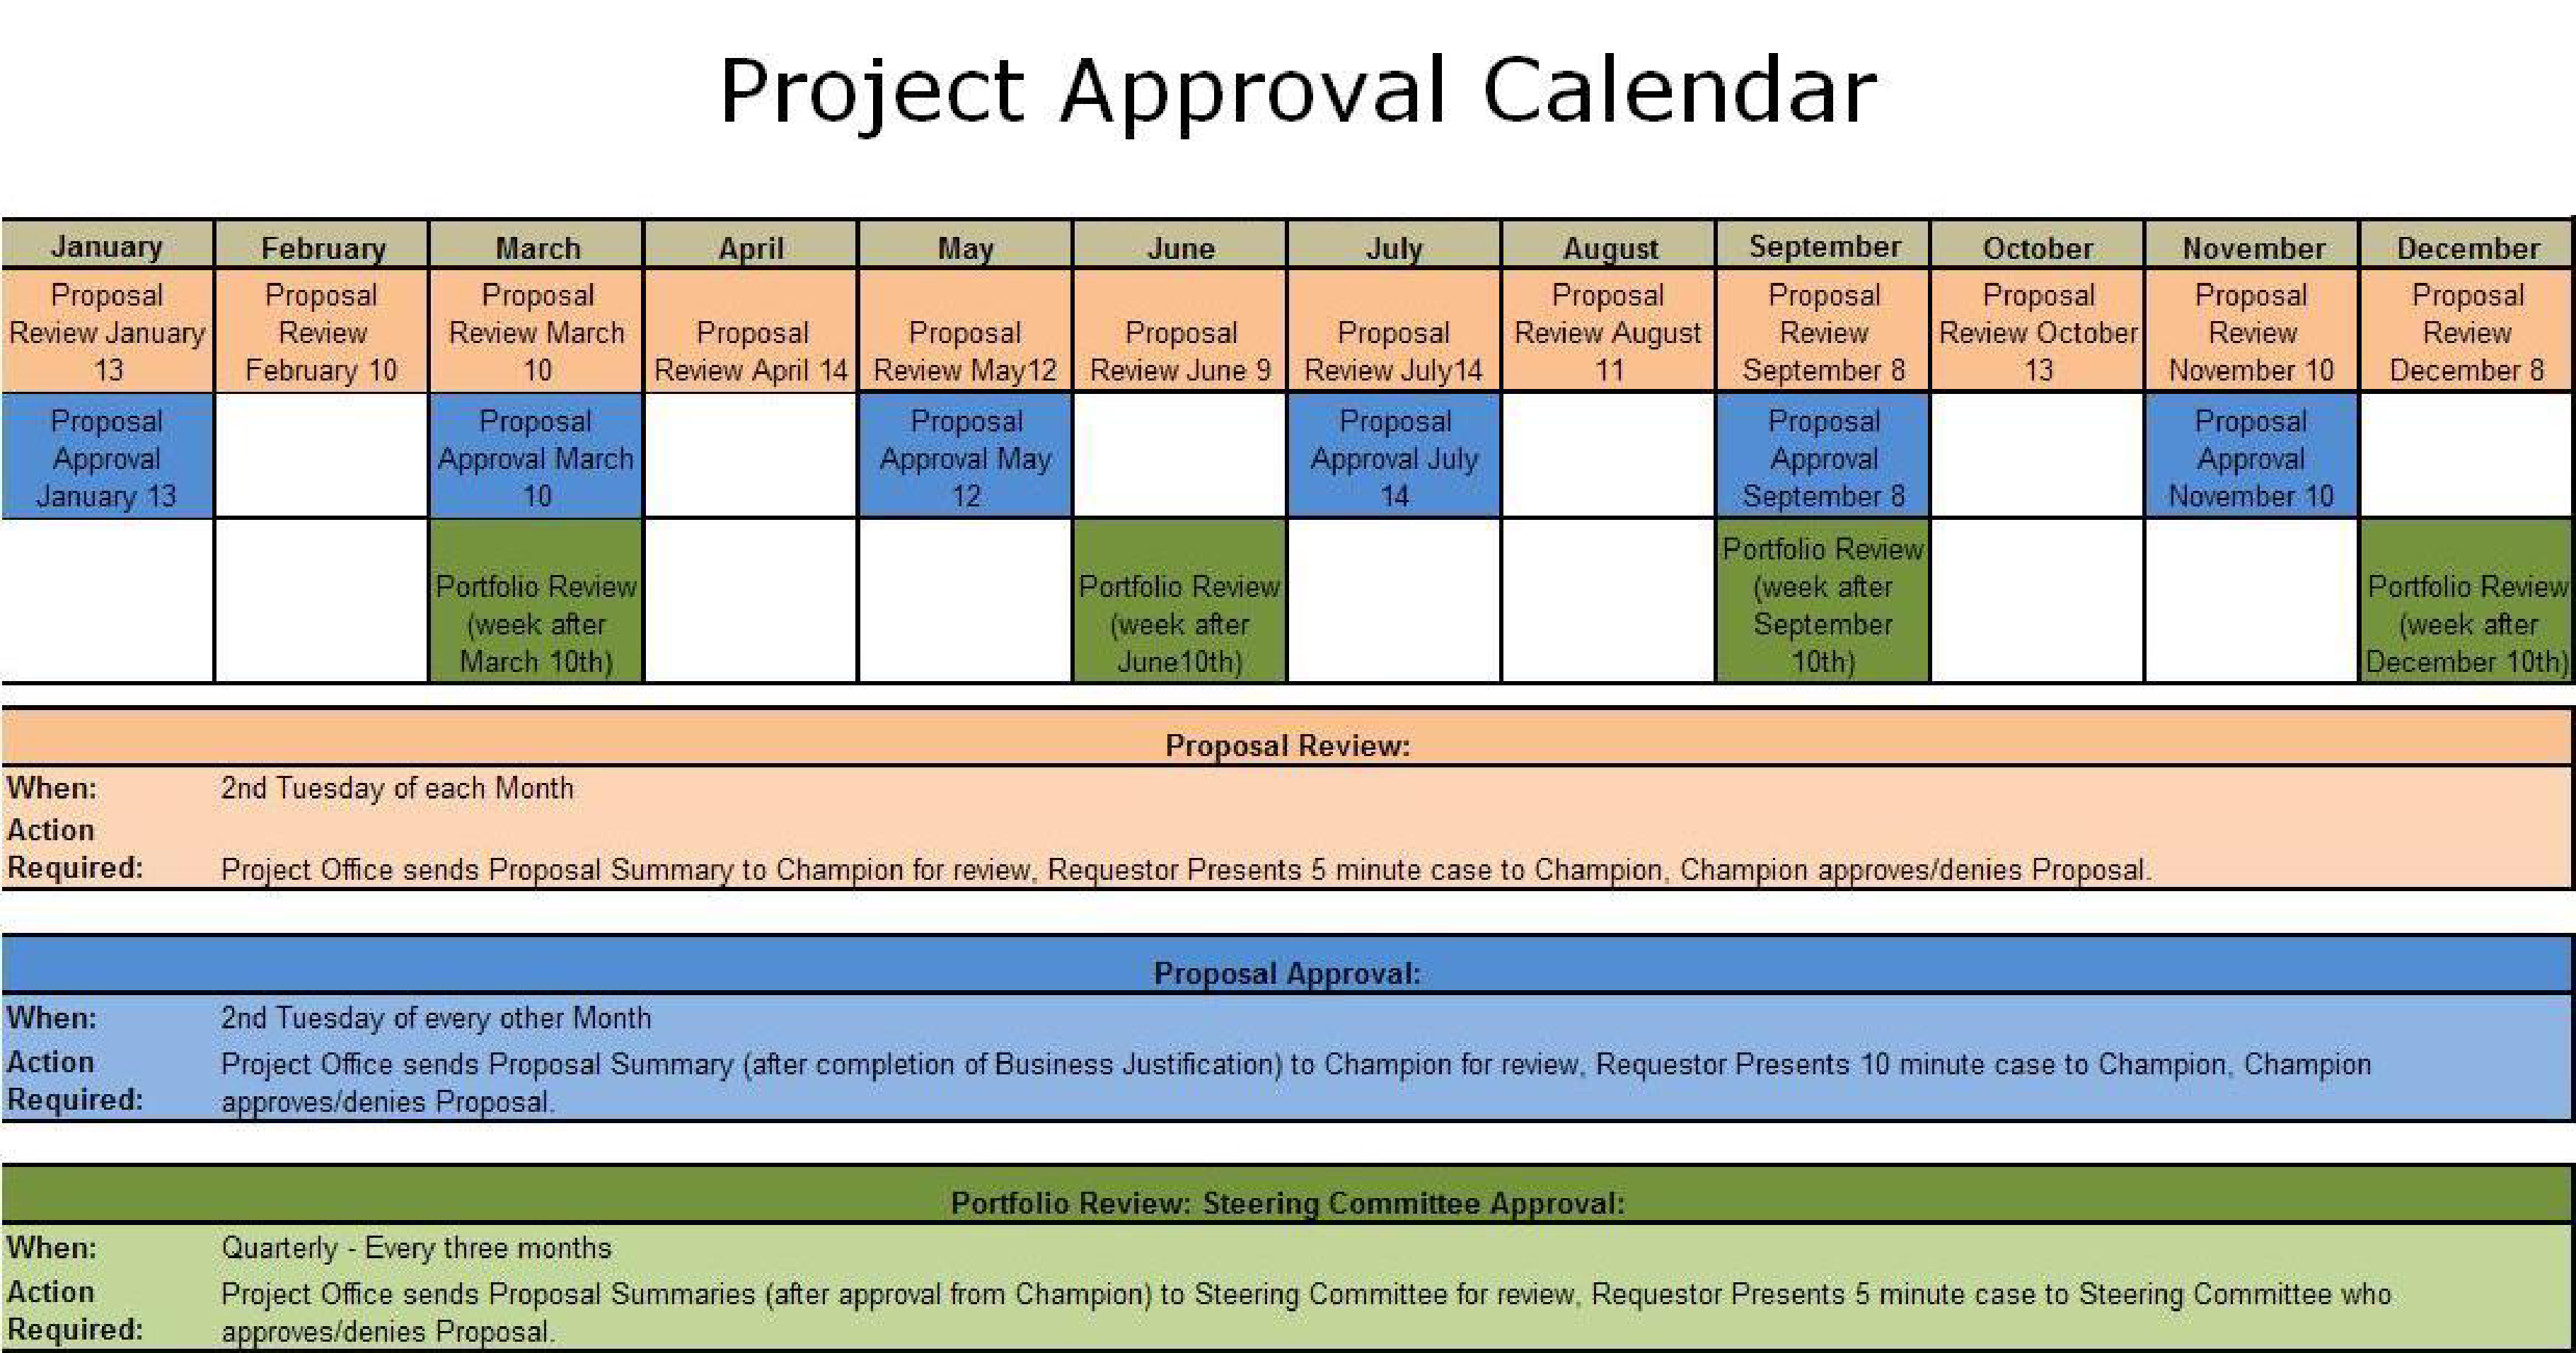 Project Approval Calendar main image